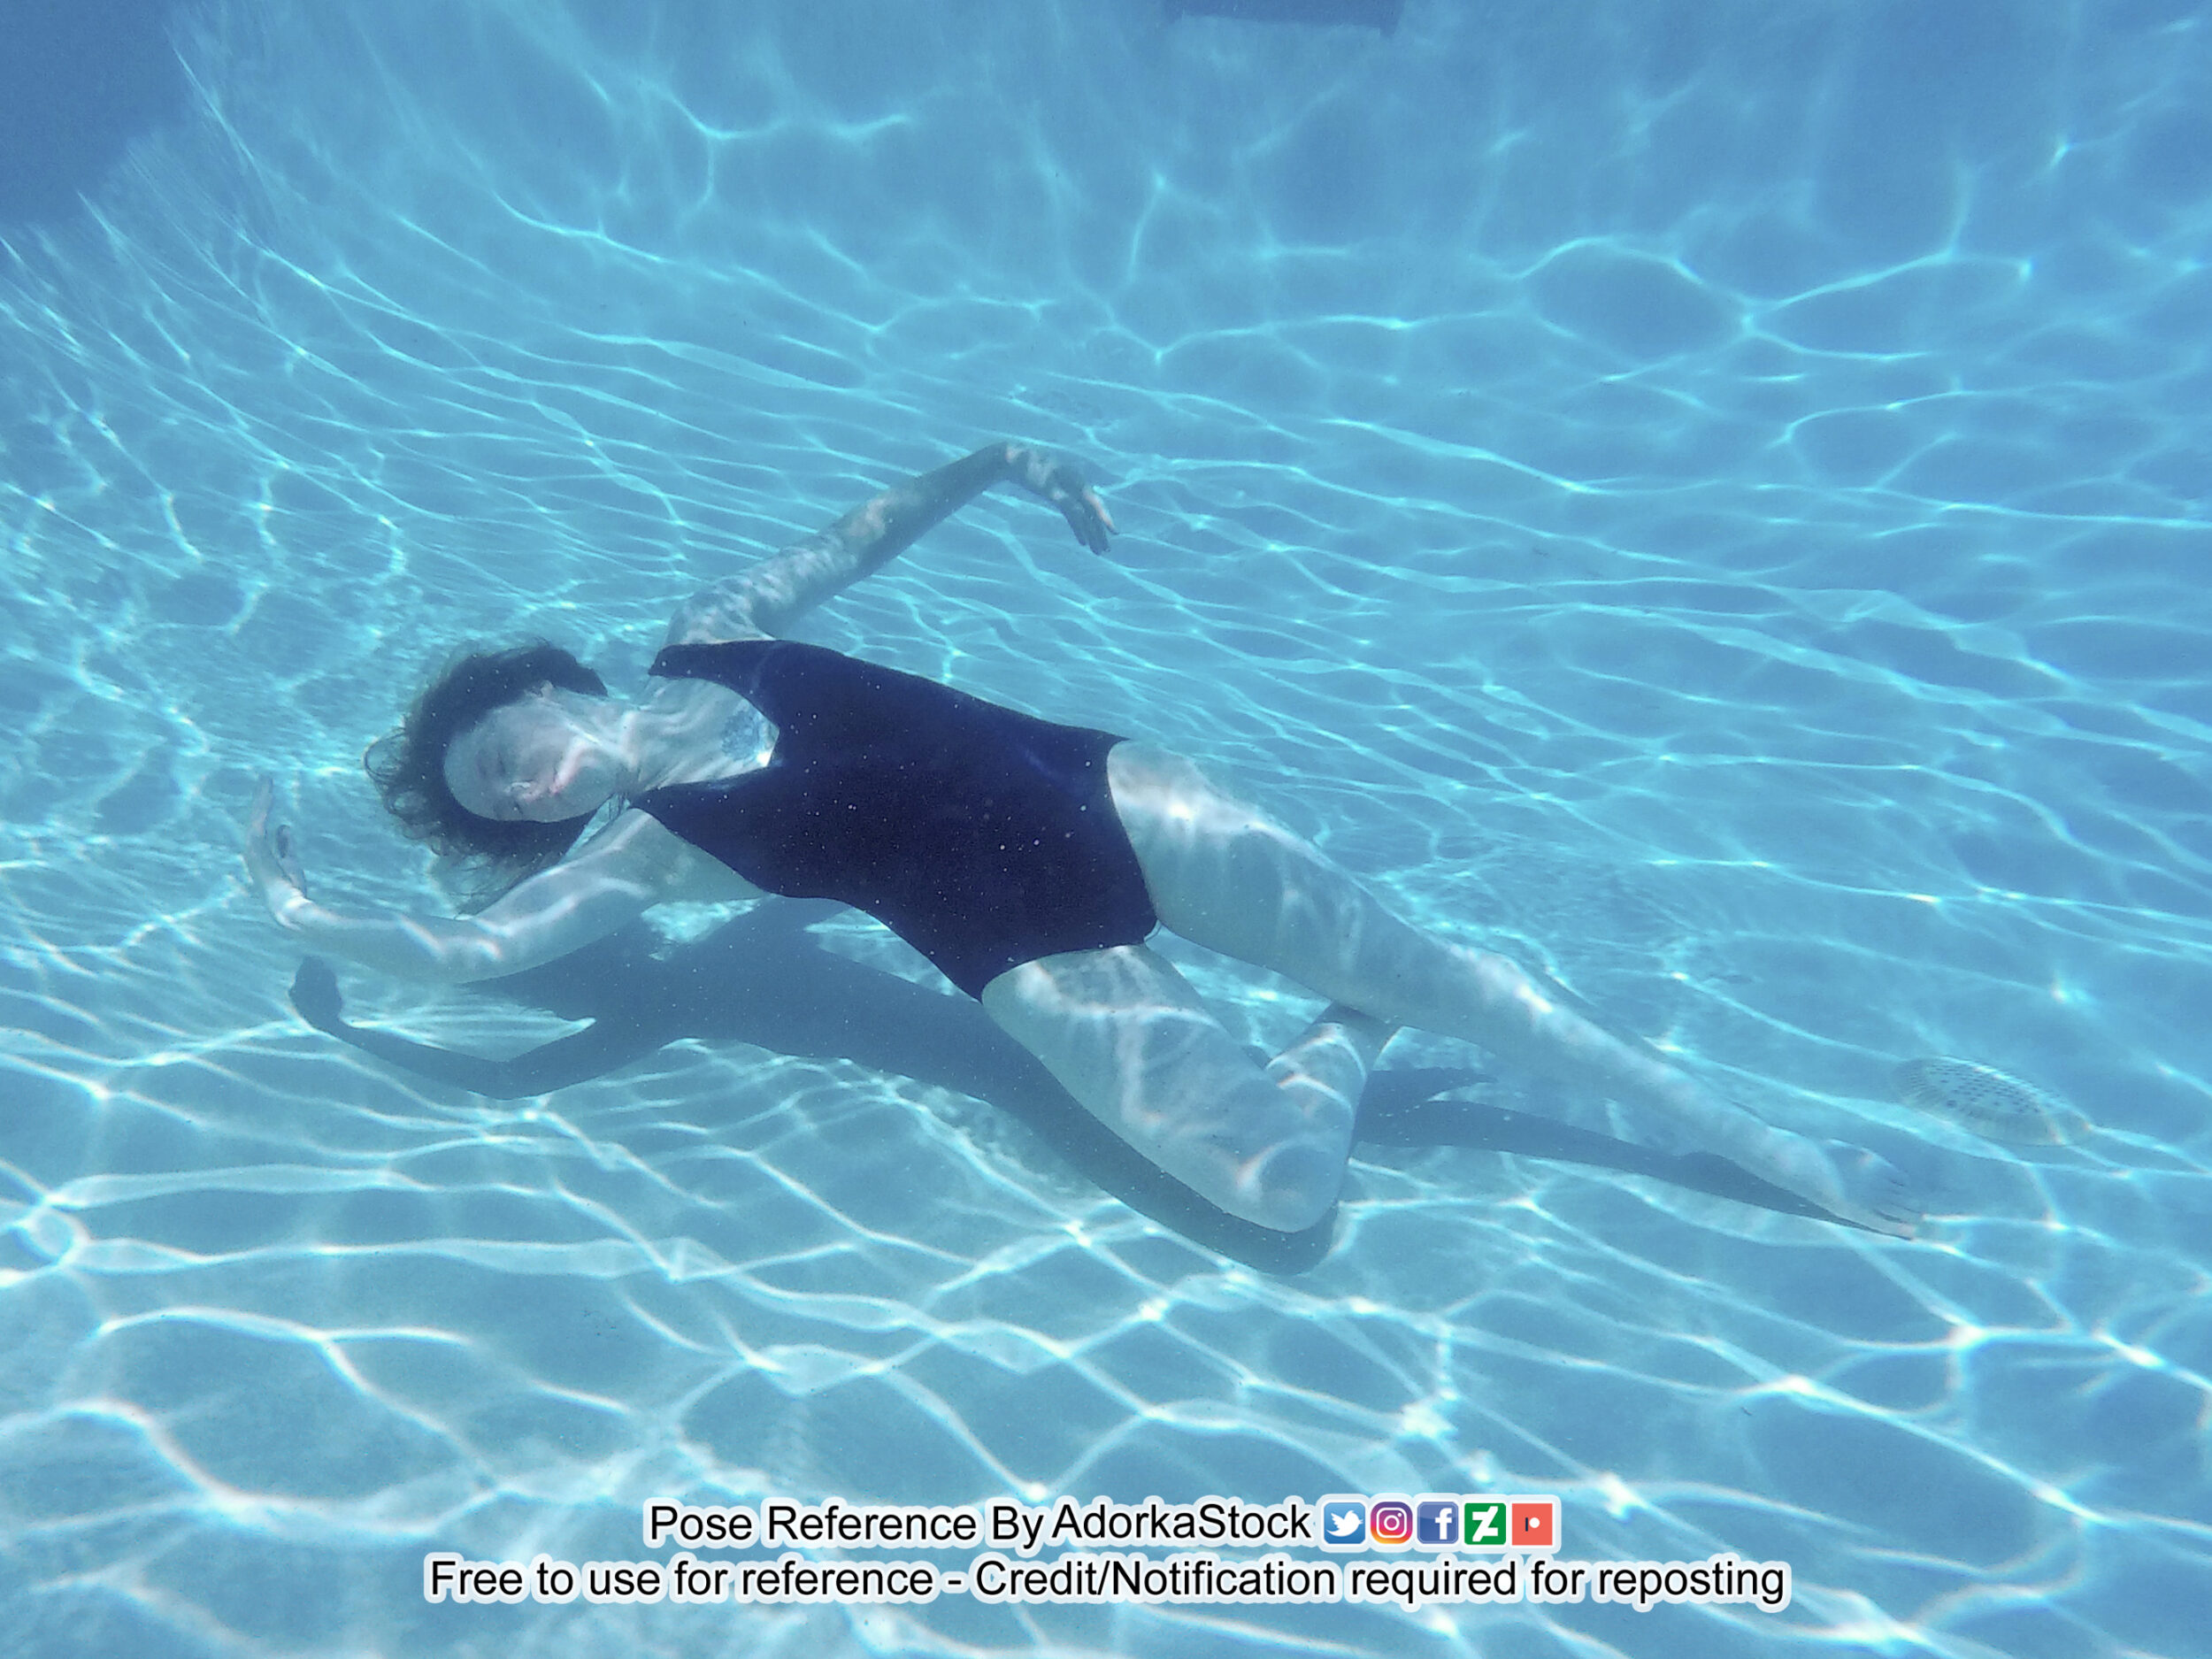 Graceful floating underwater pose reference